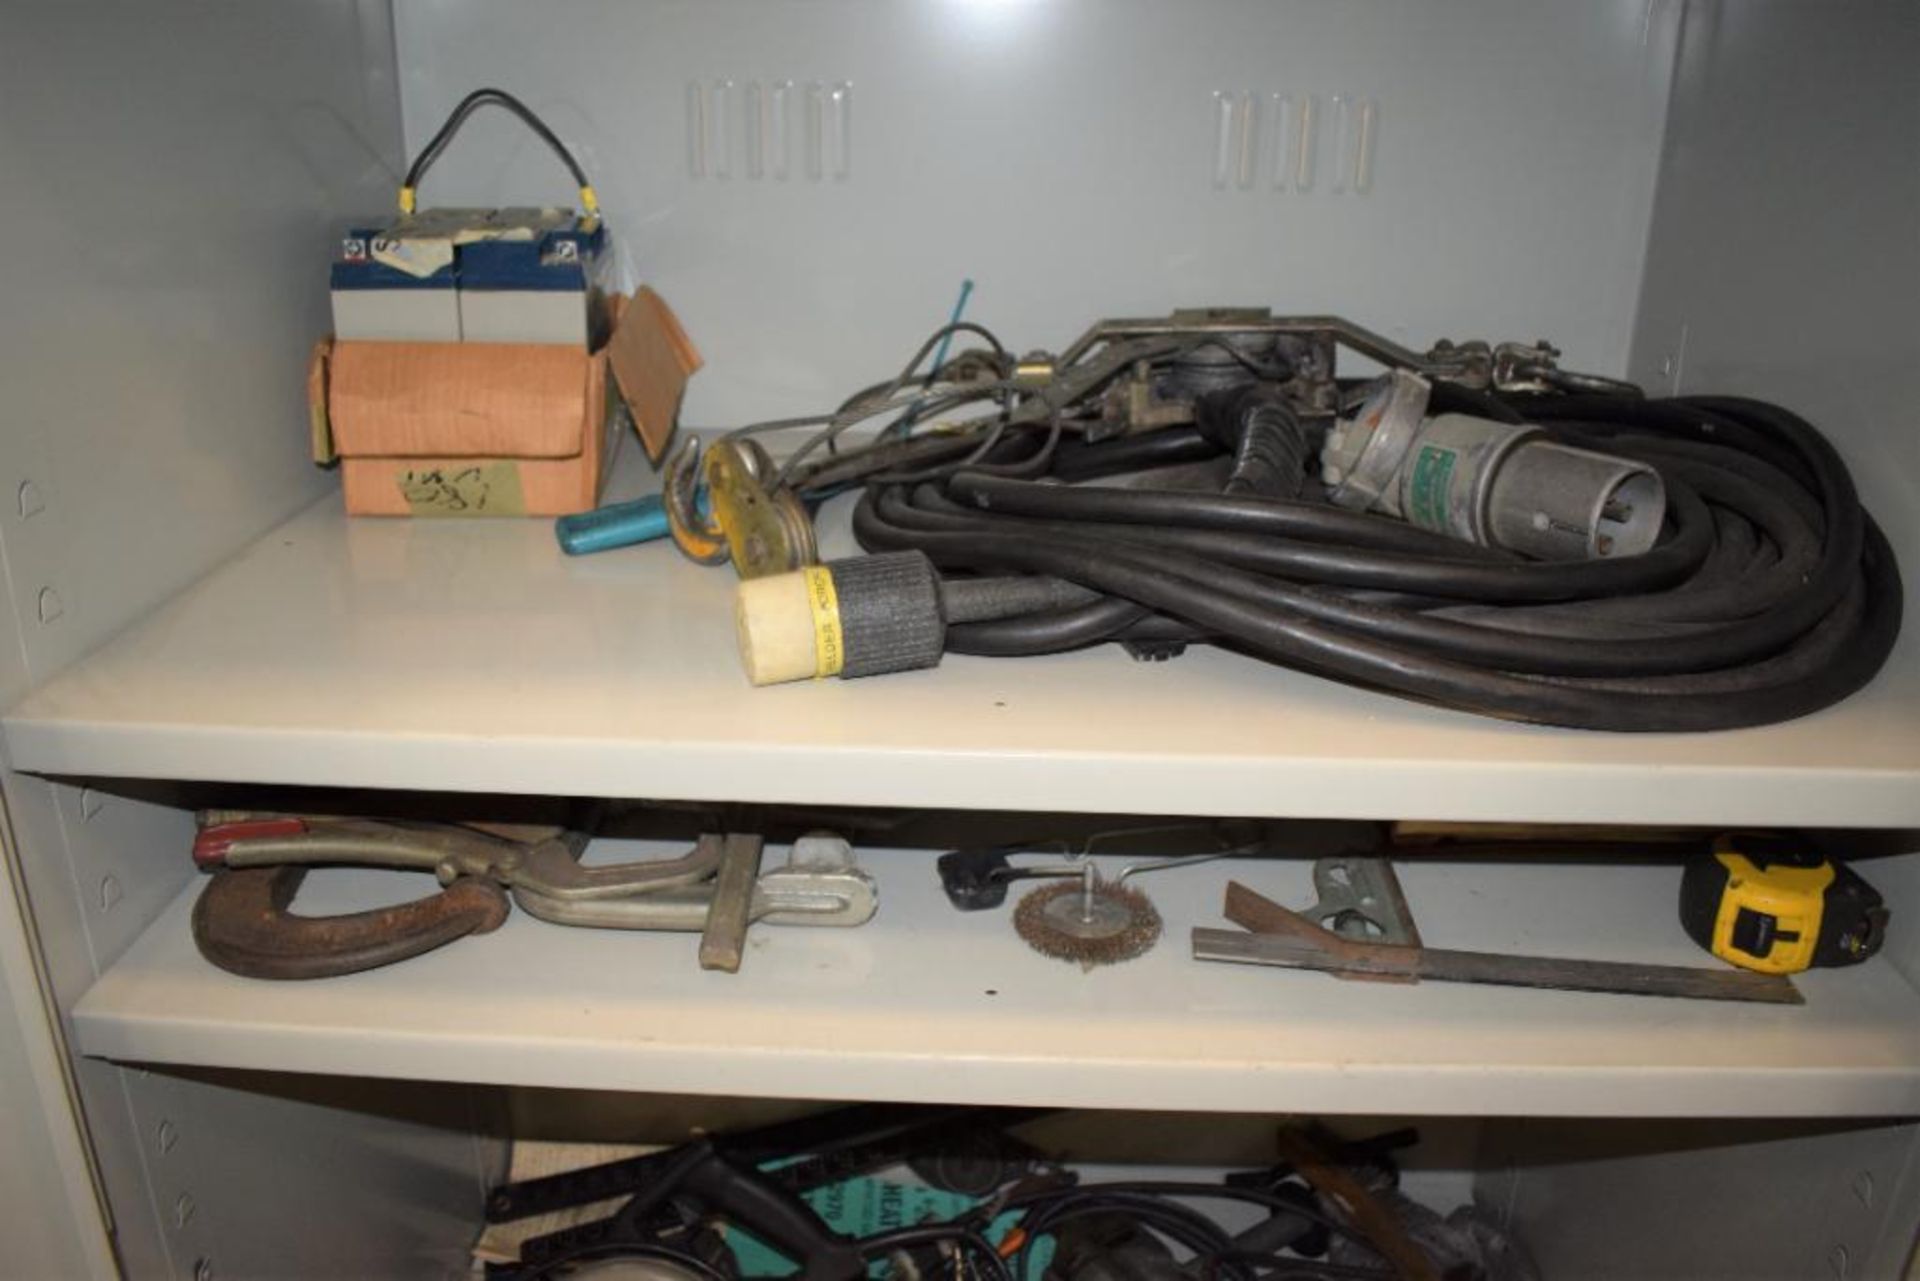 Lot Consisting Of: (1) 2 Door metal cabinets with miscellaneous tools, including saw, batteries, met - Image 3 of 10